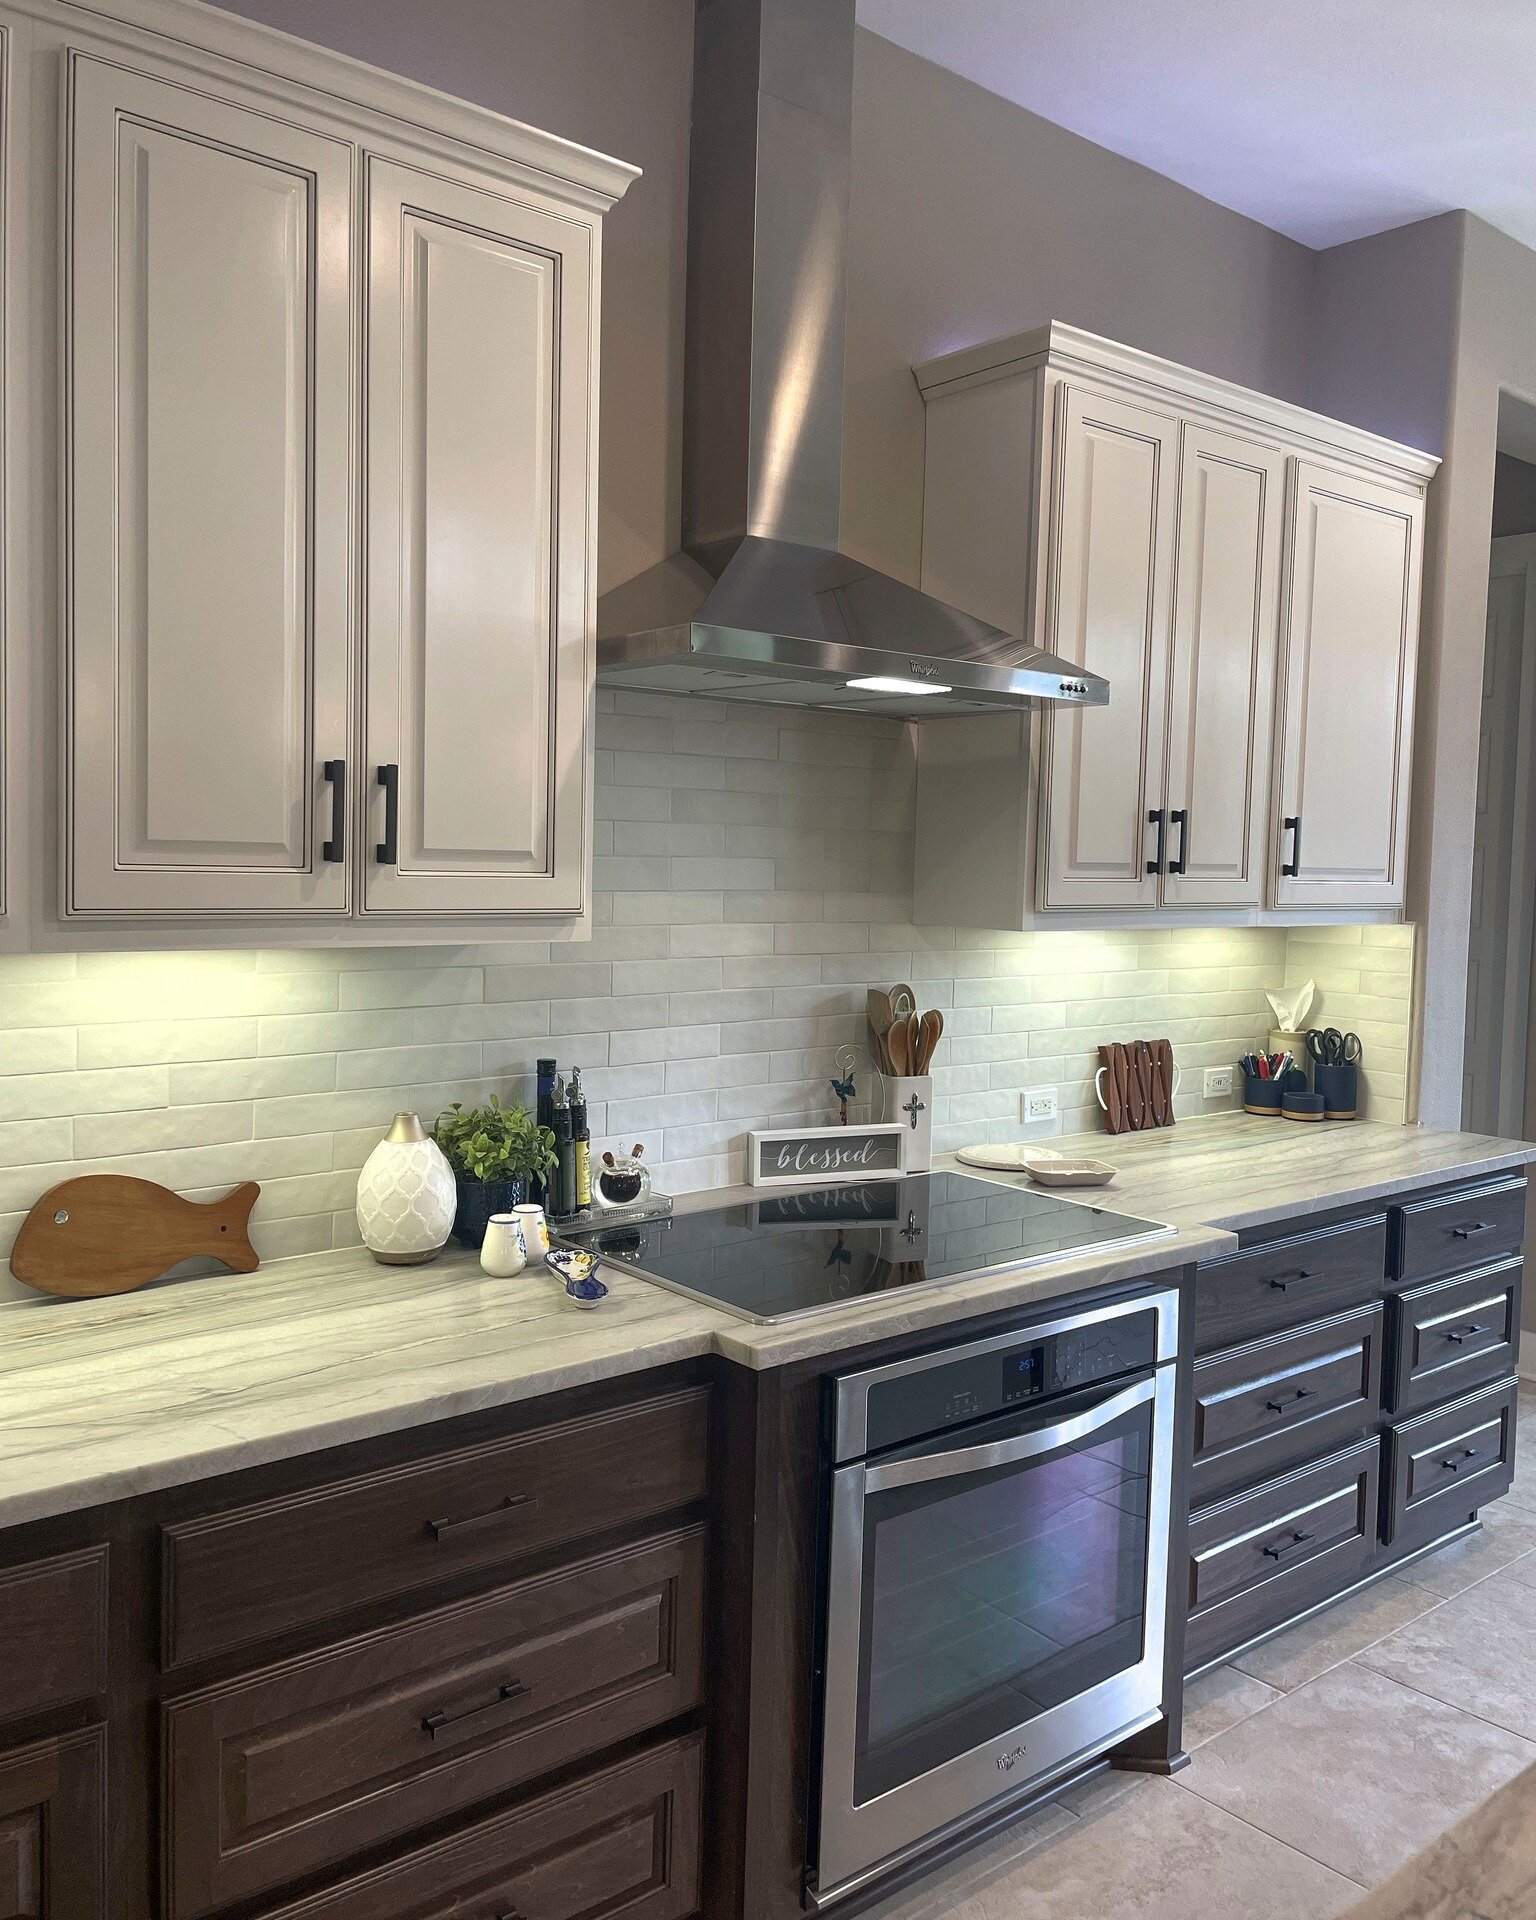 Warm transitional style kitchens are our FAVORITE🤩
-
-
What do you think of this kitchen remodel?

#leandertx #grtxremodeling #ATXinteriordesign #atxhome #atxhomes #kitchenremodeling #atxremodel #txhomes #kitchengoals #kitcheninspo #transitionaldesi